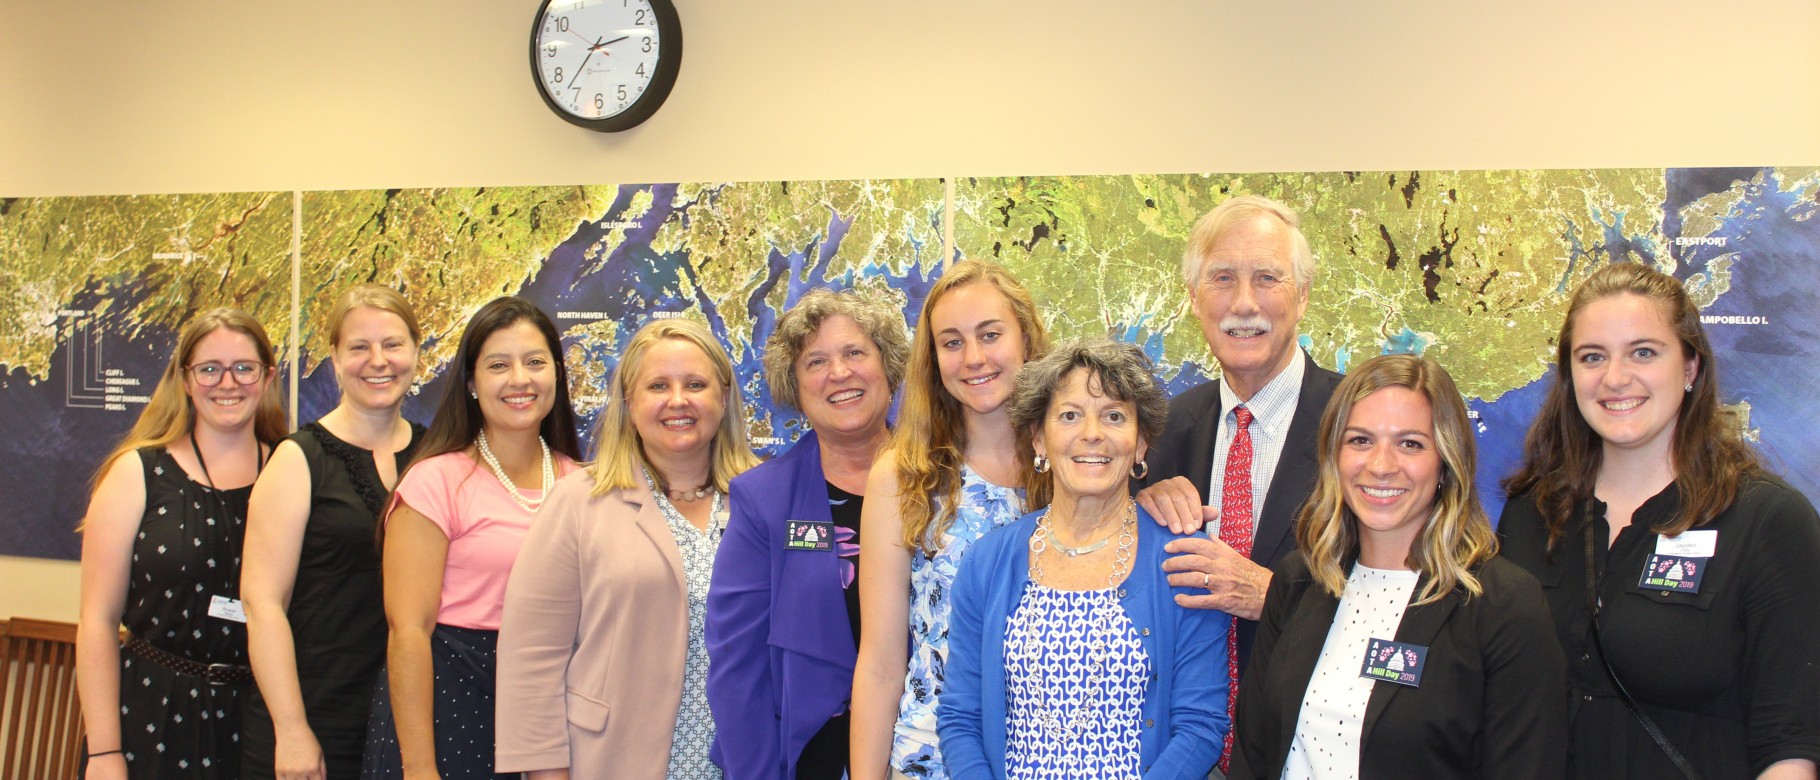 OT students and faculty met with U.S. Senator from Maine Angus King and his wife Mary Herman